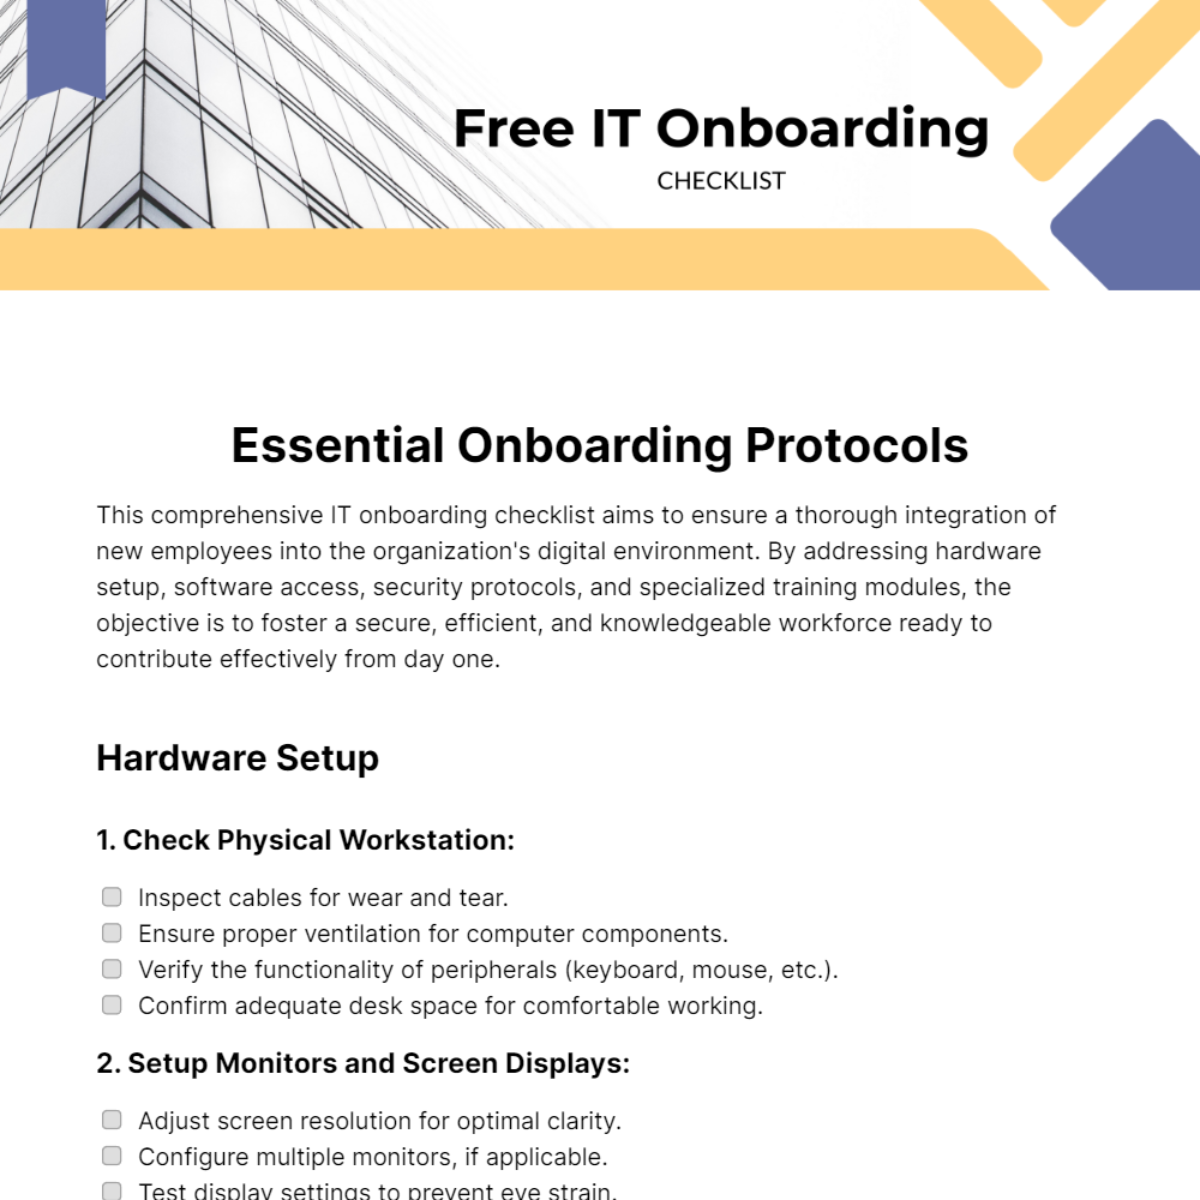 Free IT Onboarding Checklist Template